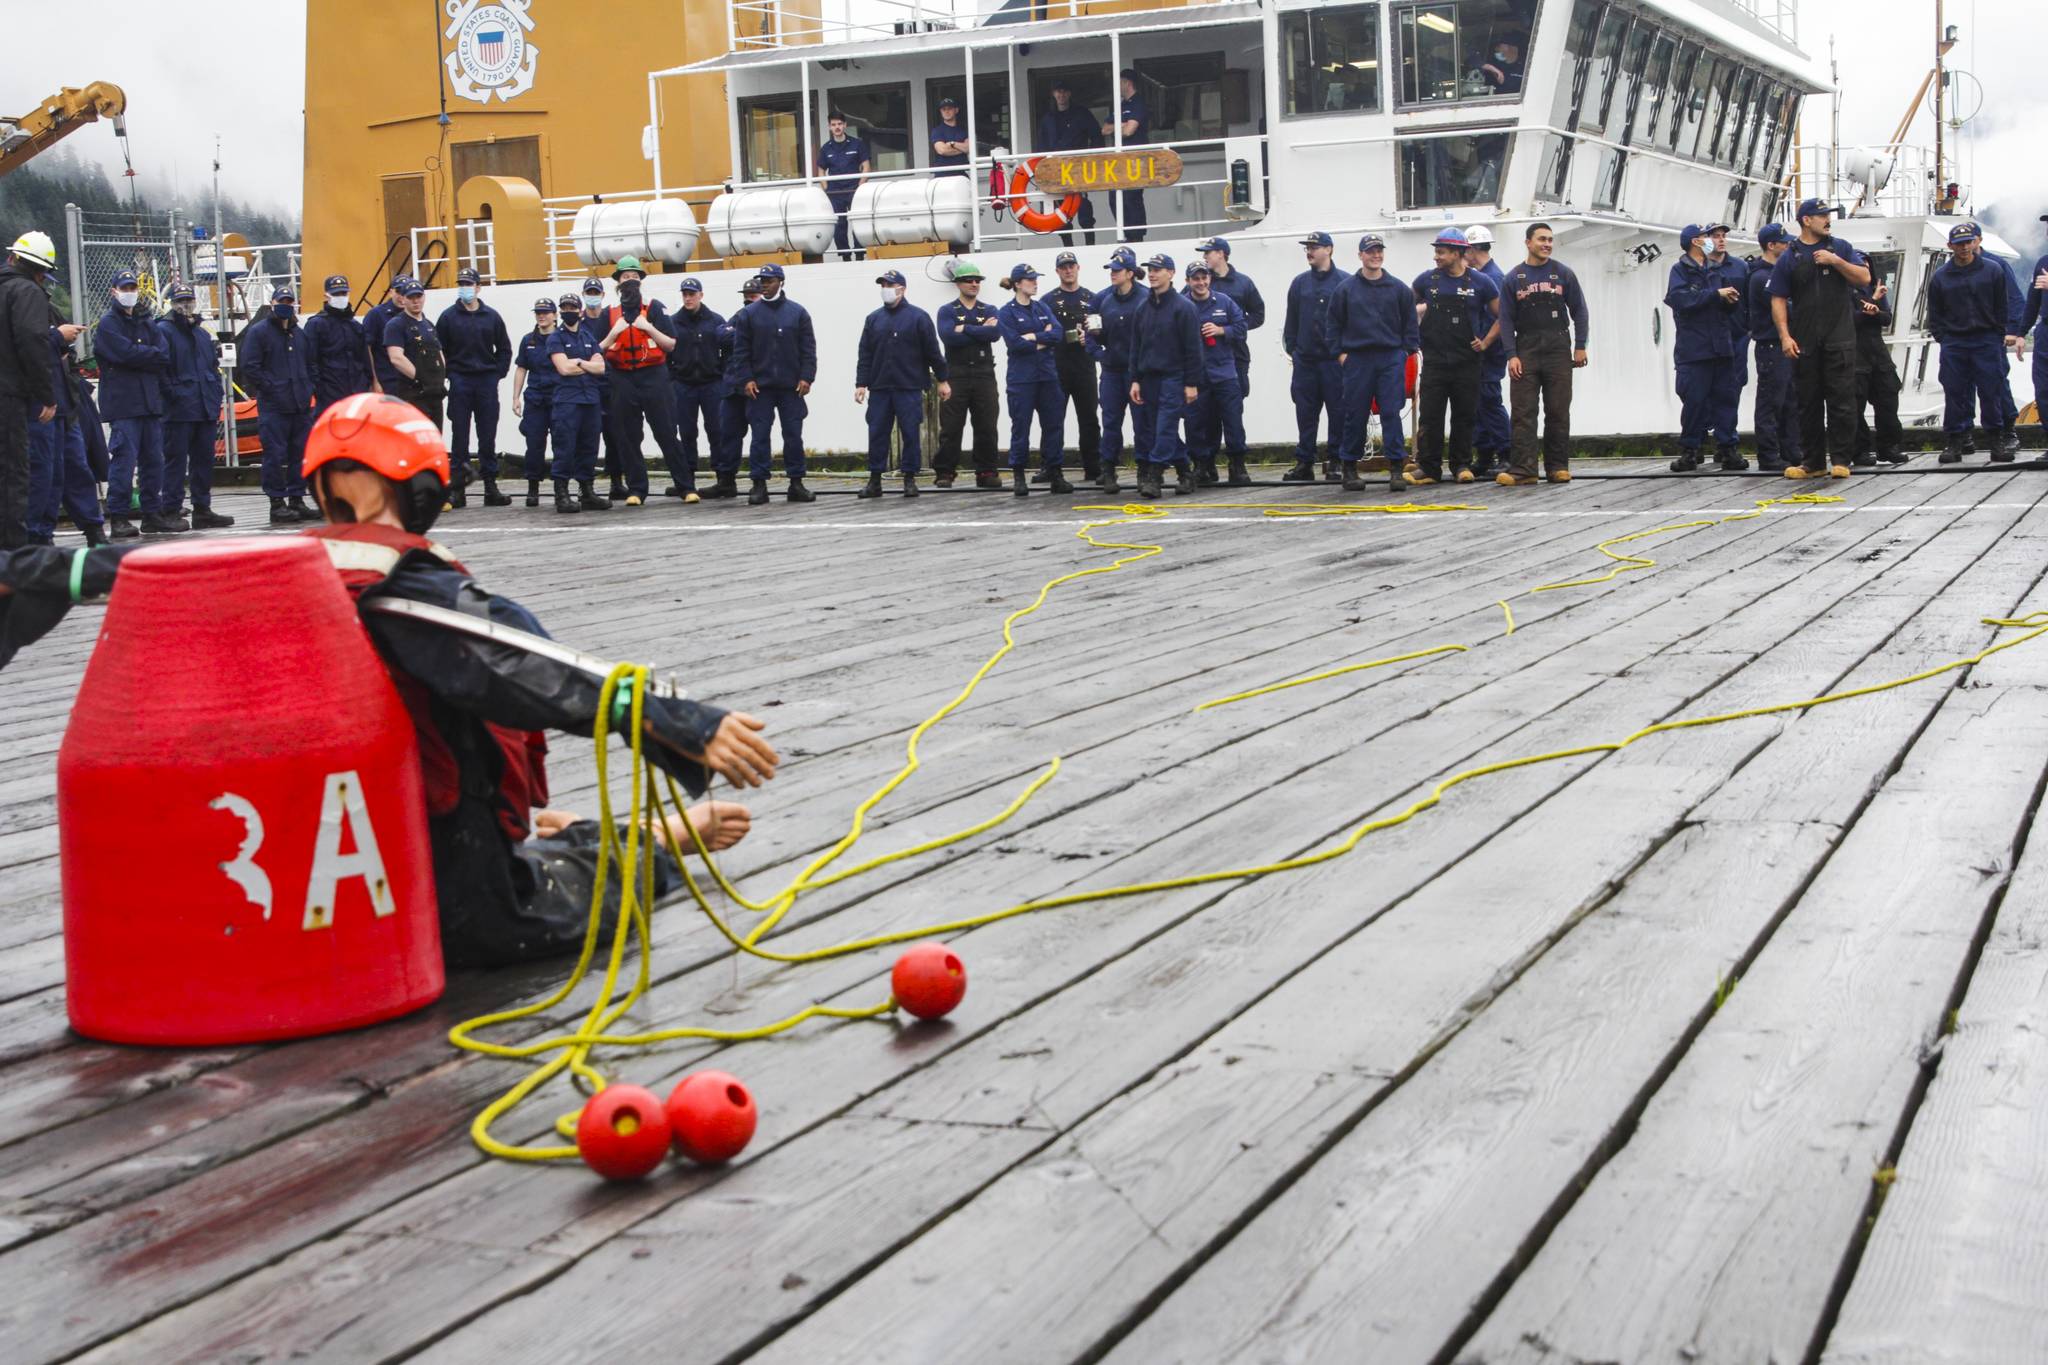 Rescue lines lay across the target dummy following a successful round in the line toss, one of the inter-vessel competitions during this year’s Buoy Tender Roundup at Sector Juneau, on Wednesday, Aug. 25, 2021. (Michael S. Lockett / Juneau Empire)